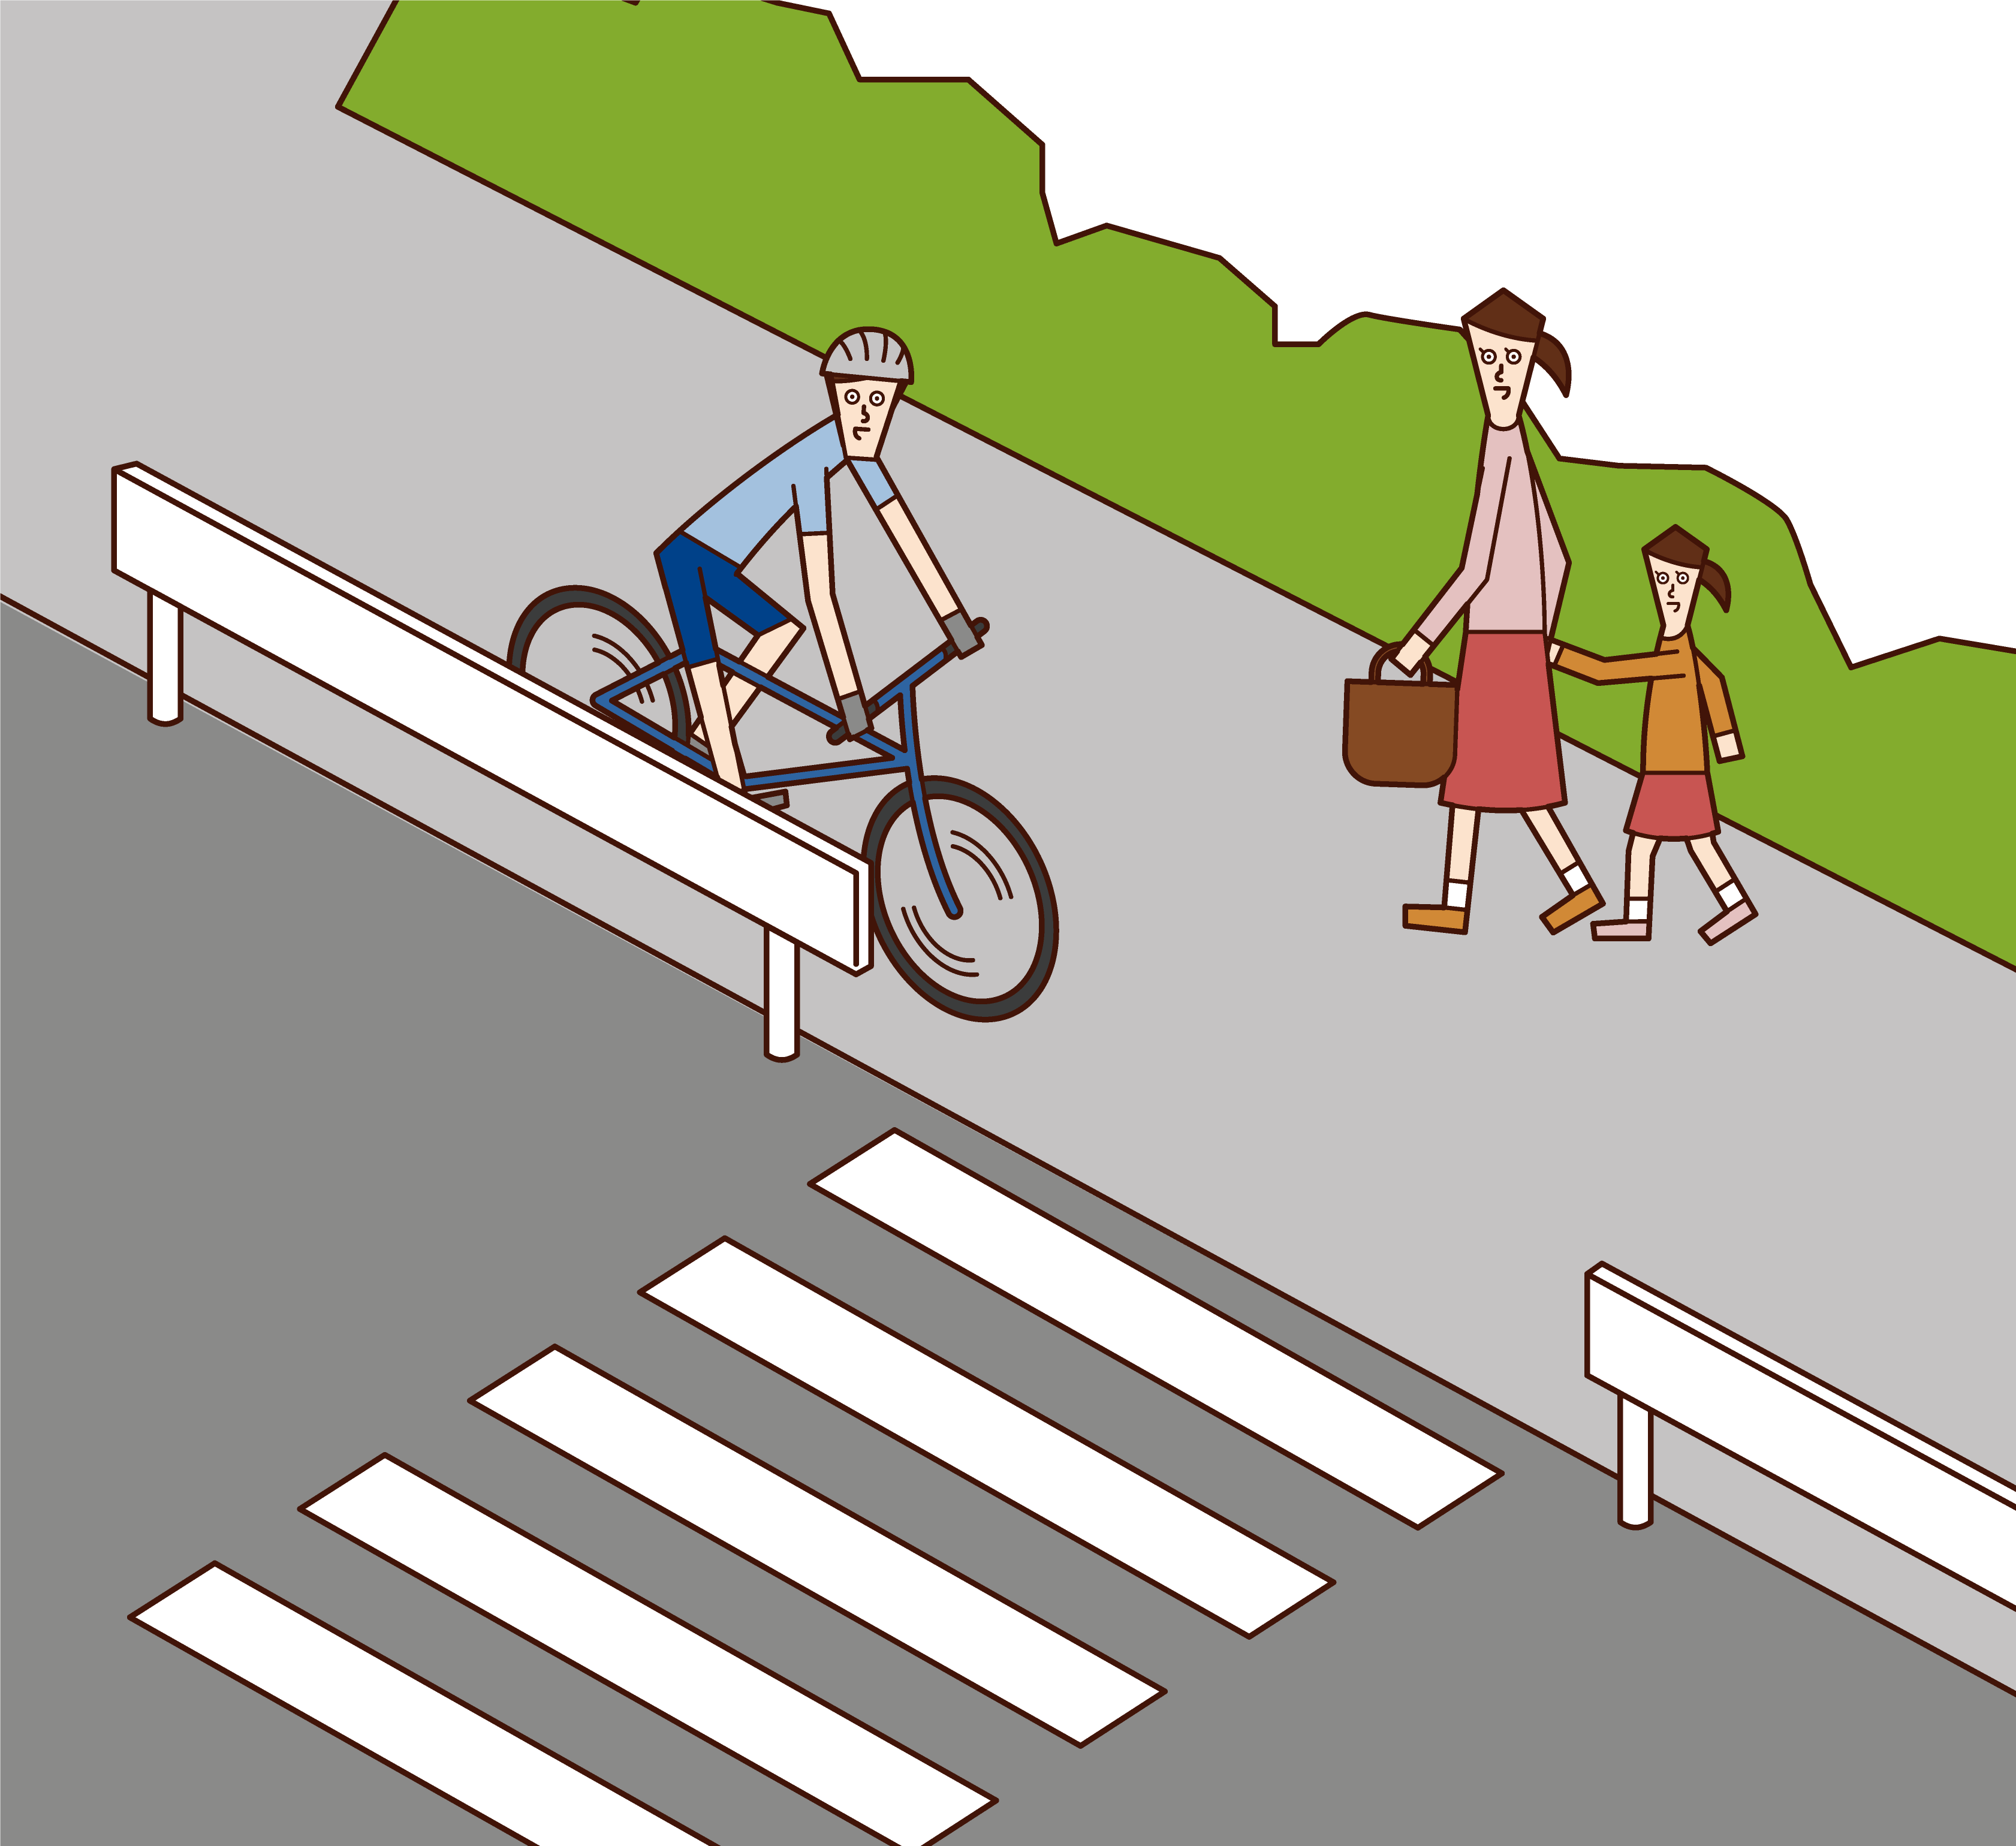 Illustration of two-seater people on a bicycle